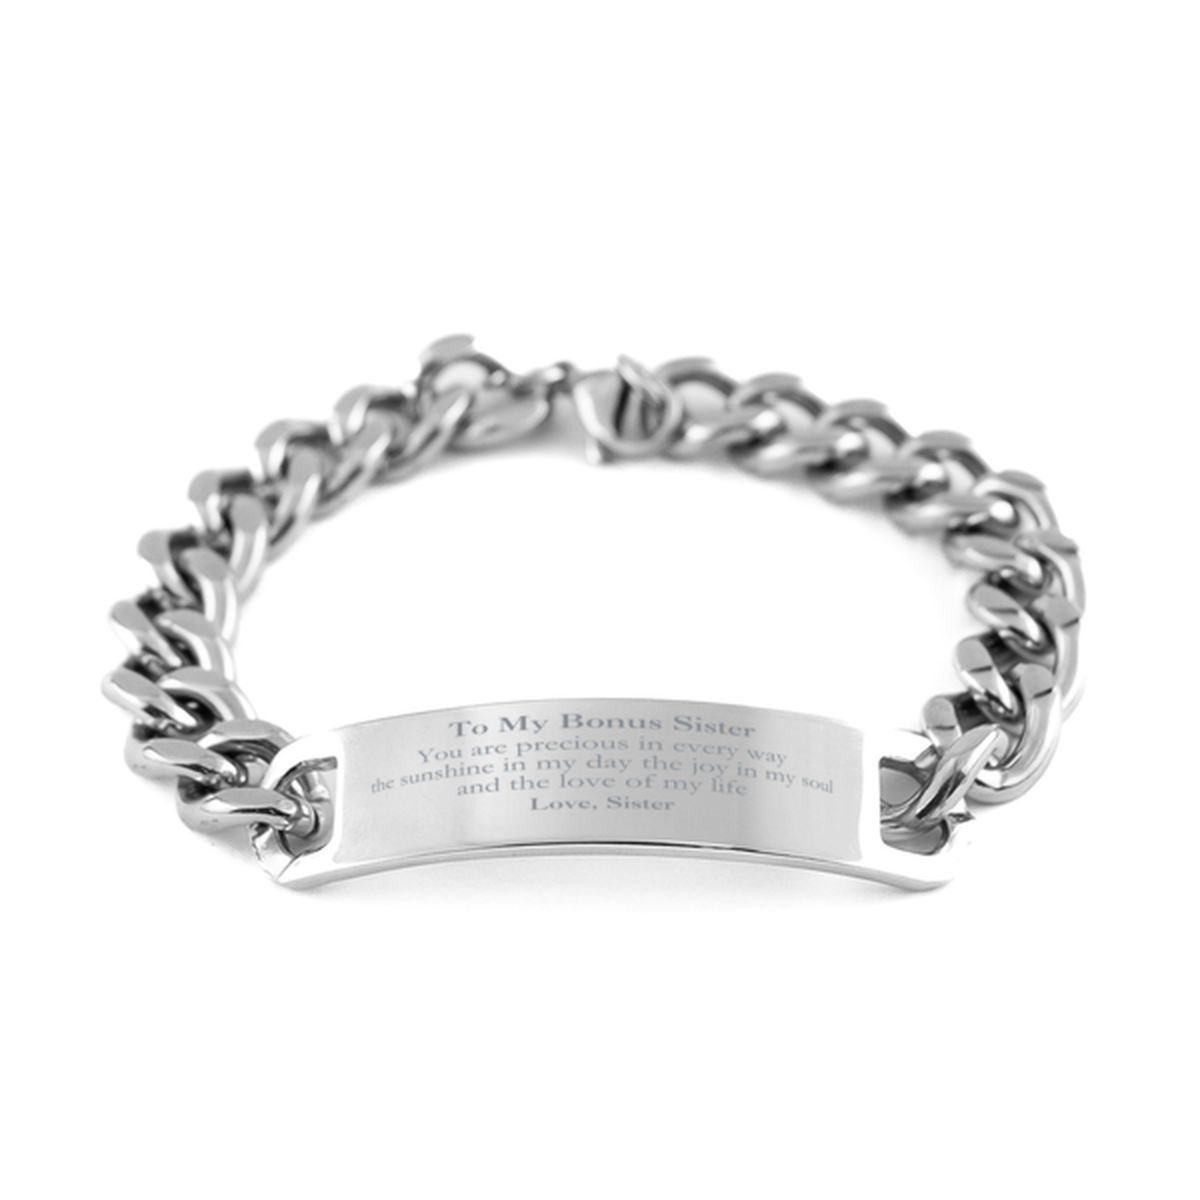 Graduation Gifts for Bonus Sister Cuban Chain Stainless Steel Bracelet Present from Sister, Christmas Bonus Sister Birthday Gifts Bonus Sister You are precious in every way the sunshine in my day. Love, Sister